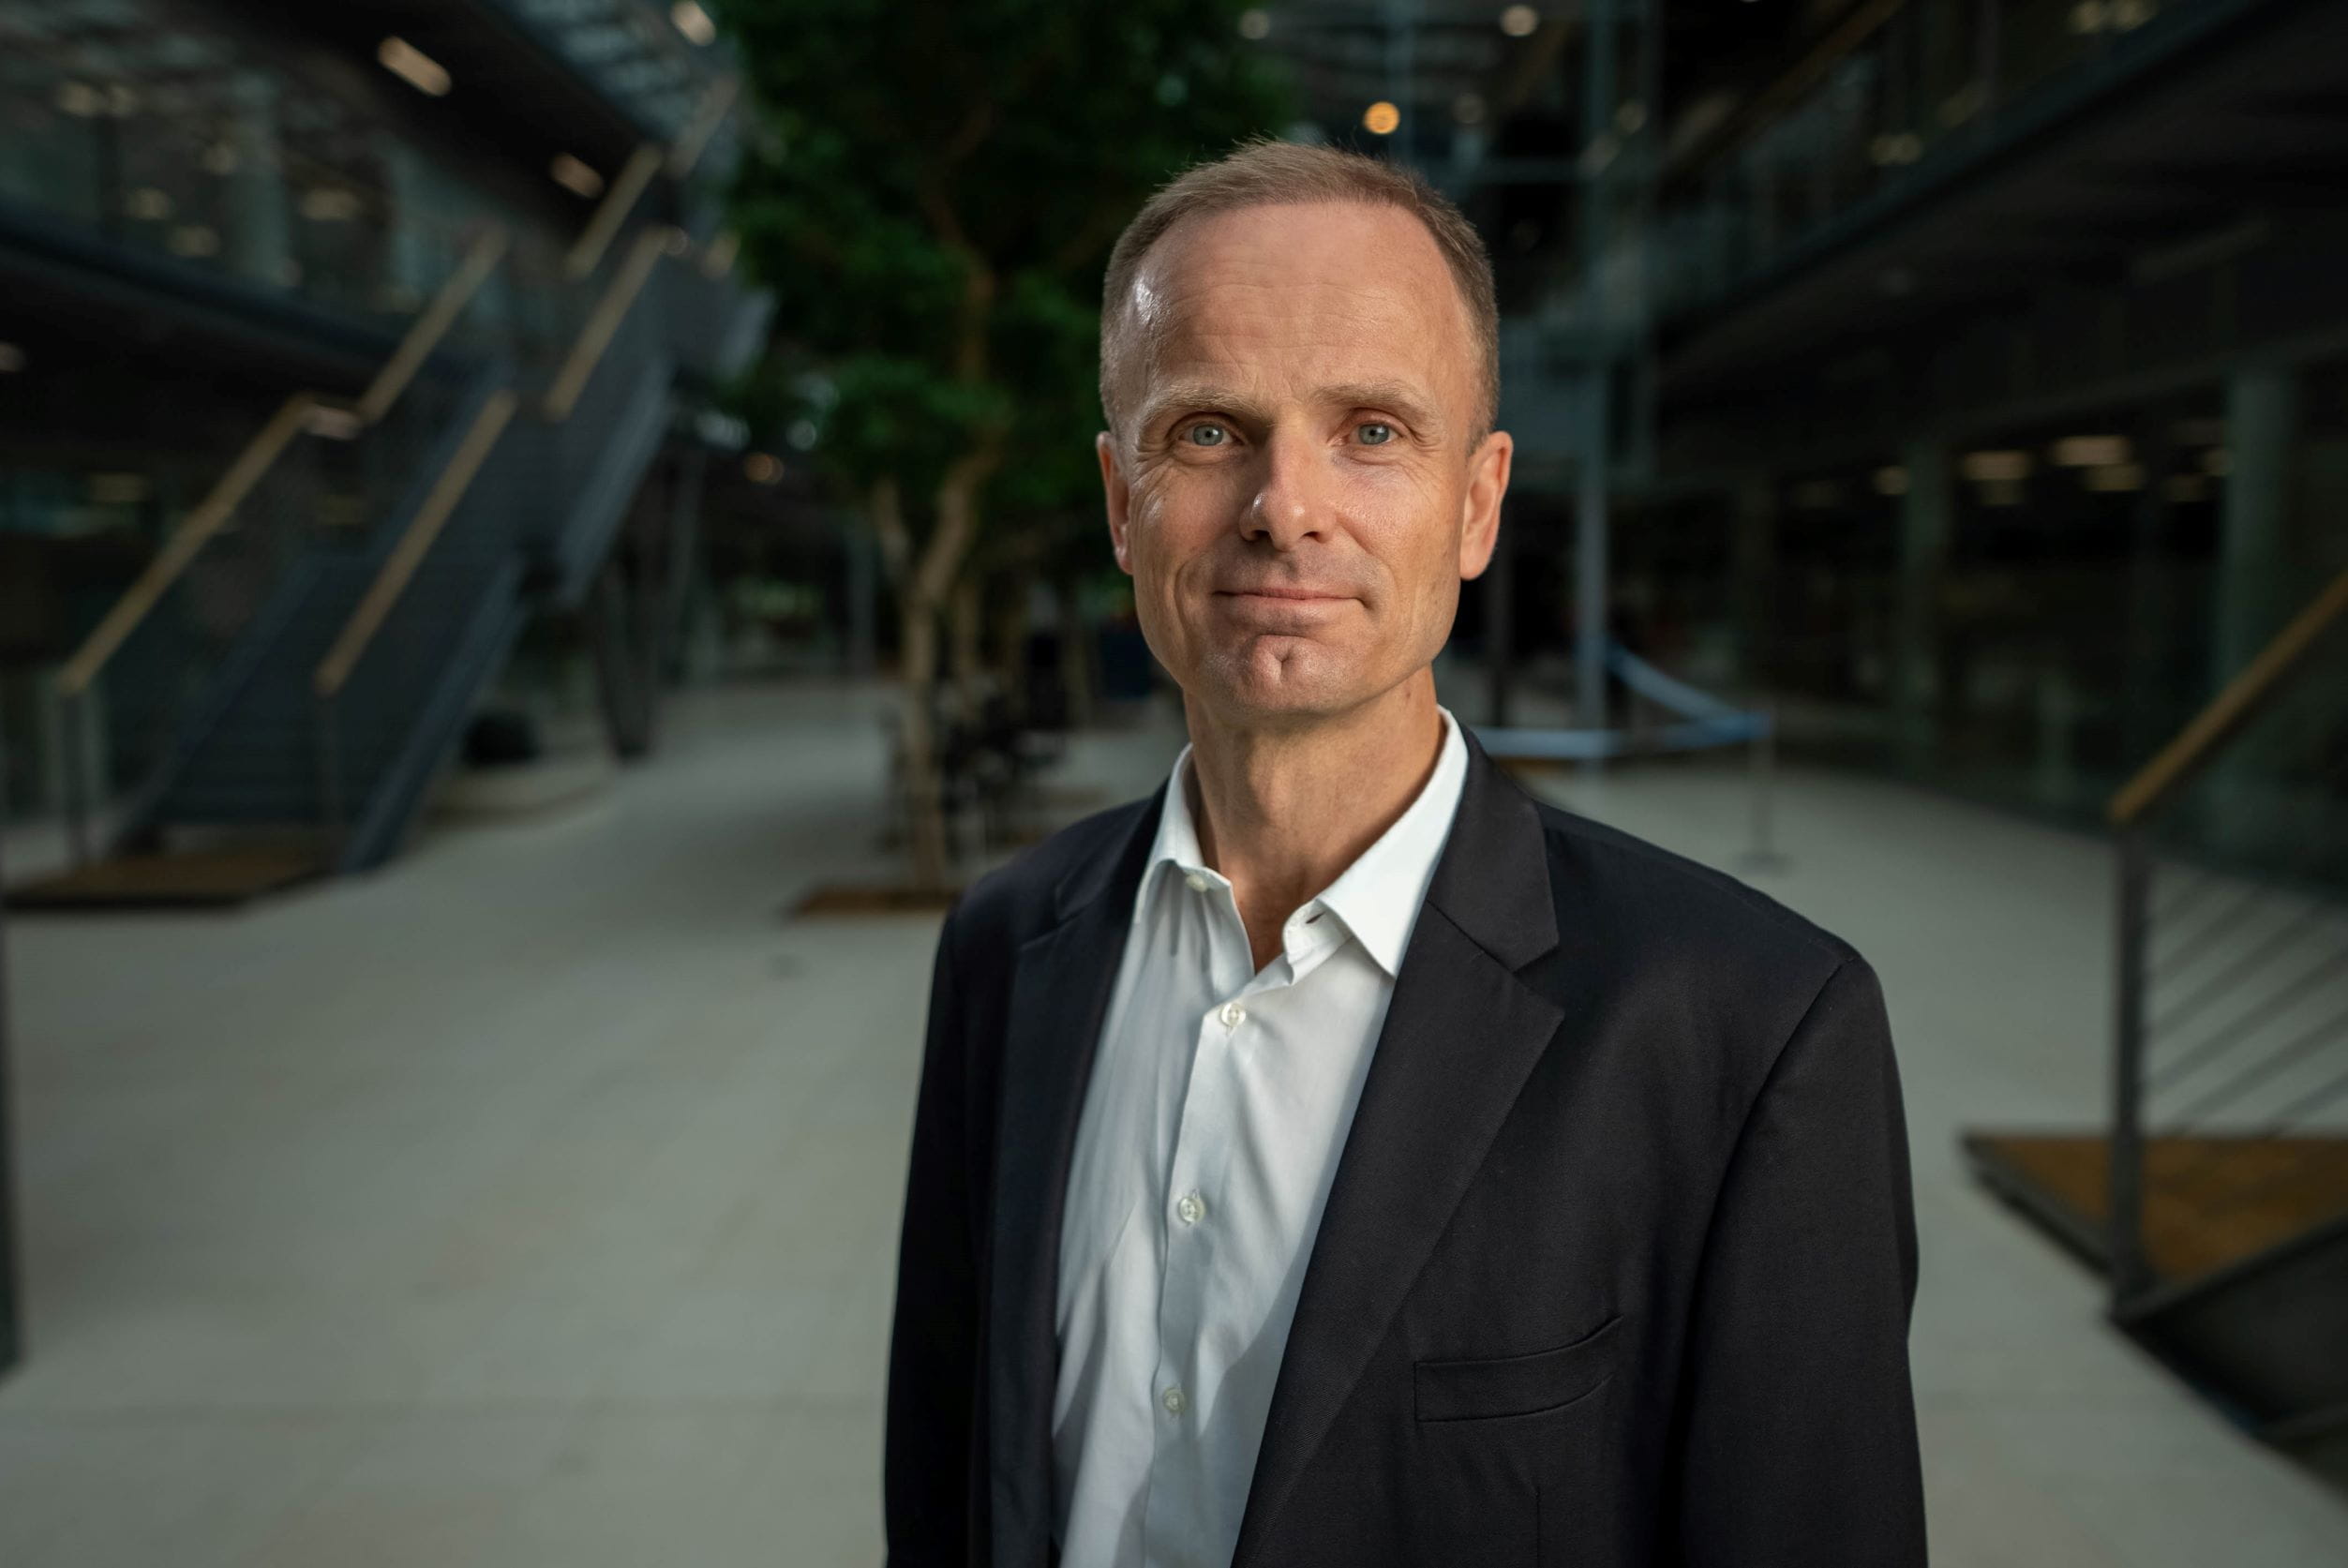 Per Mejnert Kristensen will join Ørsted on 1 August 2022 with the task of scaling regional business and accelerating green energy transformation.